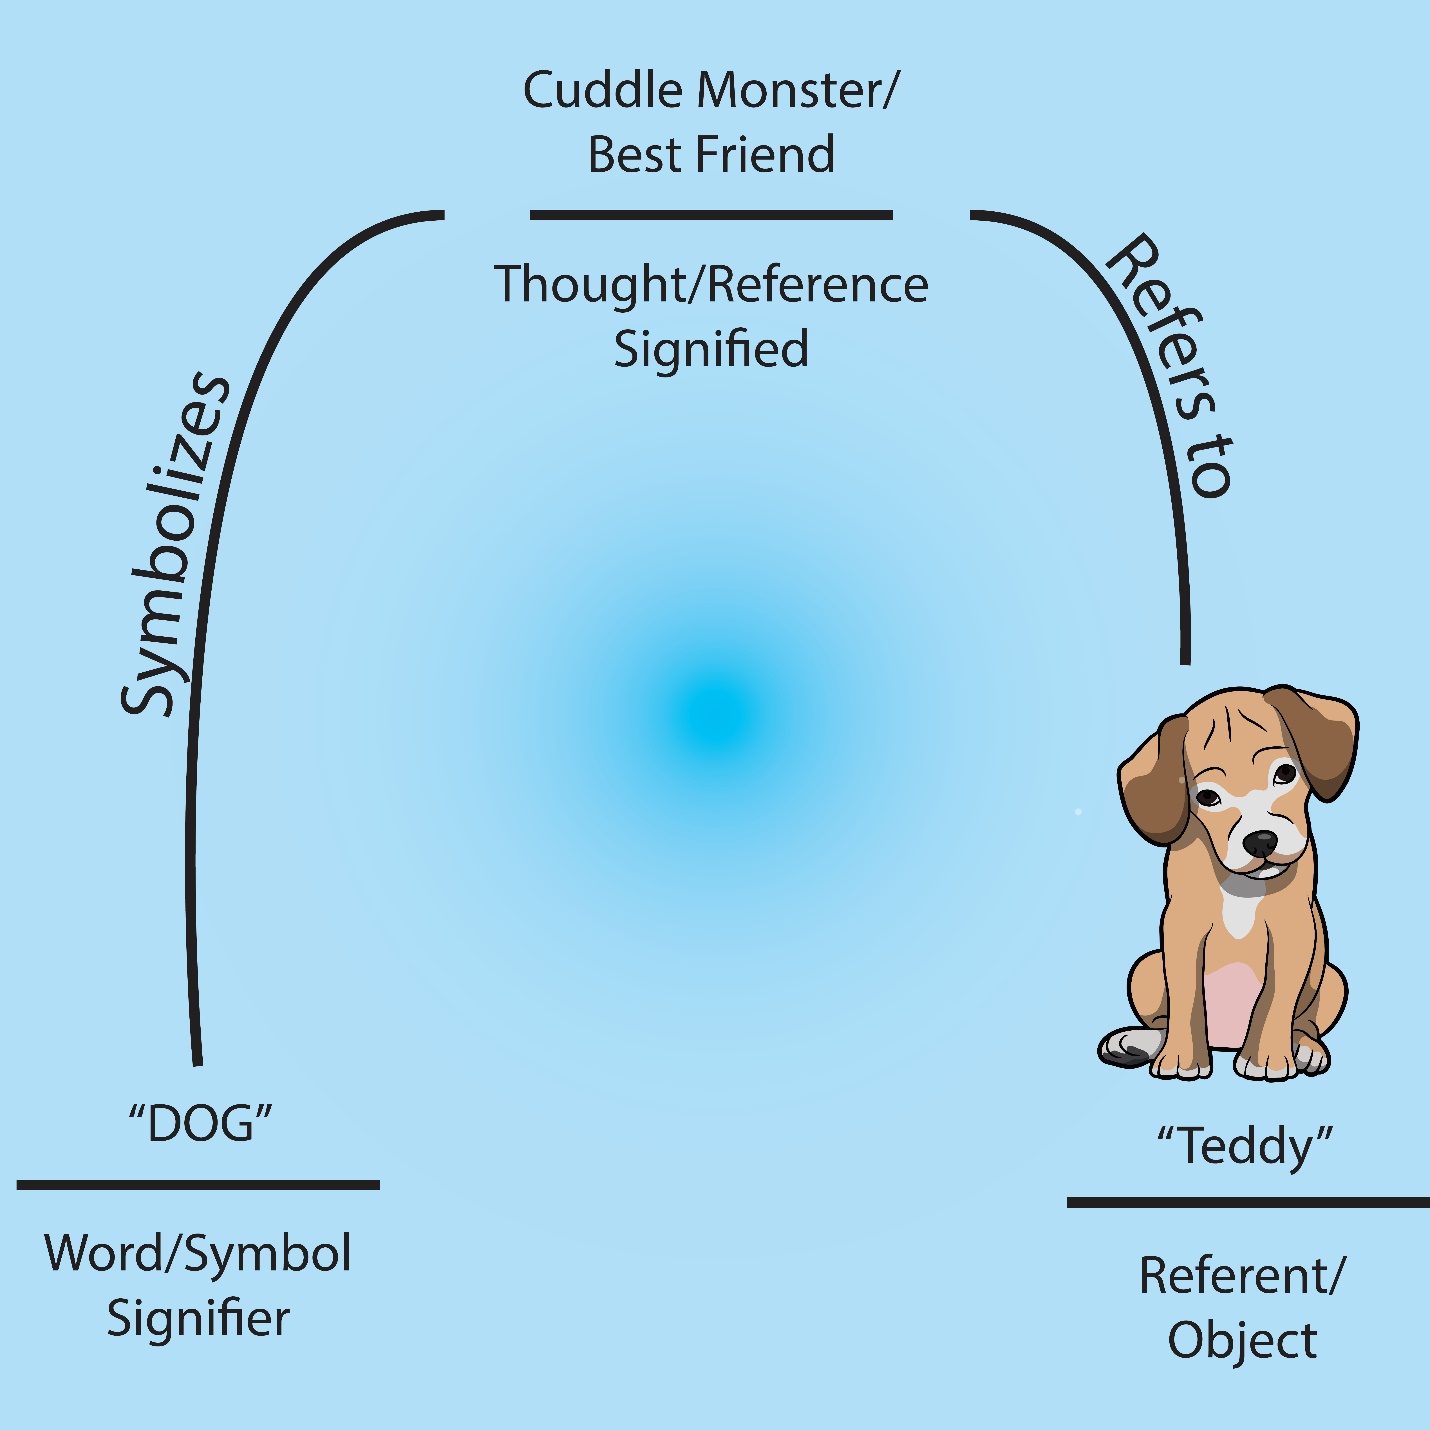 A line runs from the word "Dog" to a drawing of a puppy and the name "Teddy". "Dog" is labeled "word/symbol signifier" and "Teddy" is labeled "referent/object". The line is annotated with "symbolizes" "Cuddle Monster/Best Friend: Though/ reference signified" "refers to" pointing to the picture of the puppy.